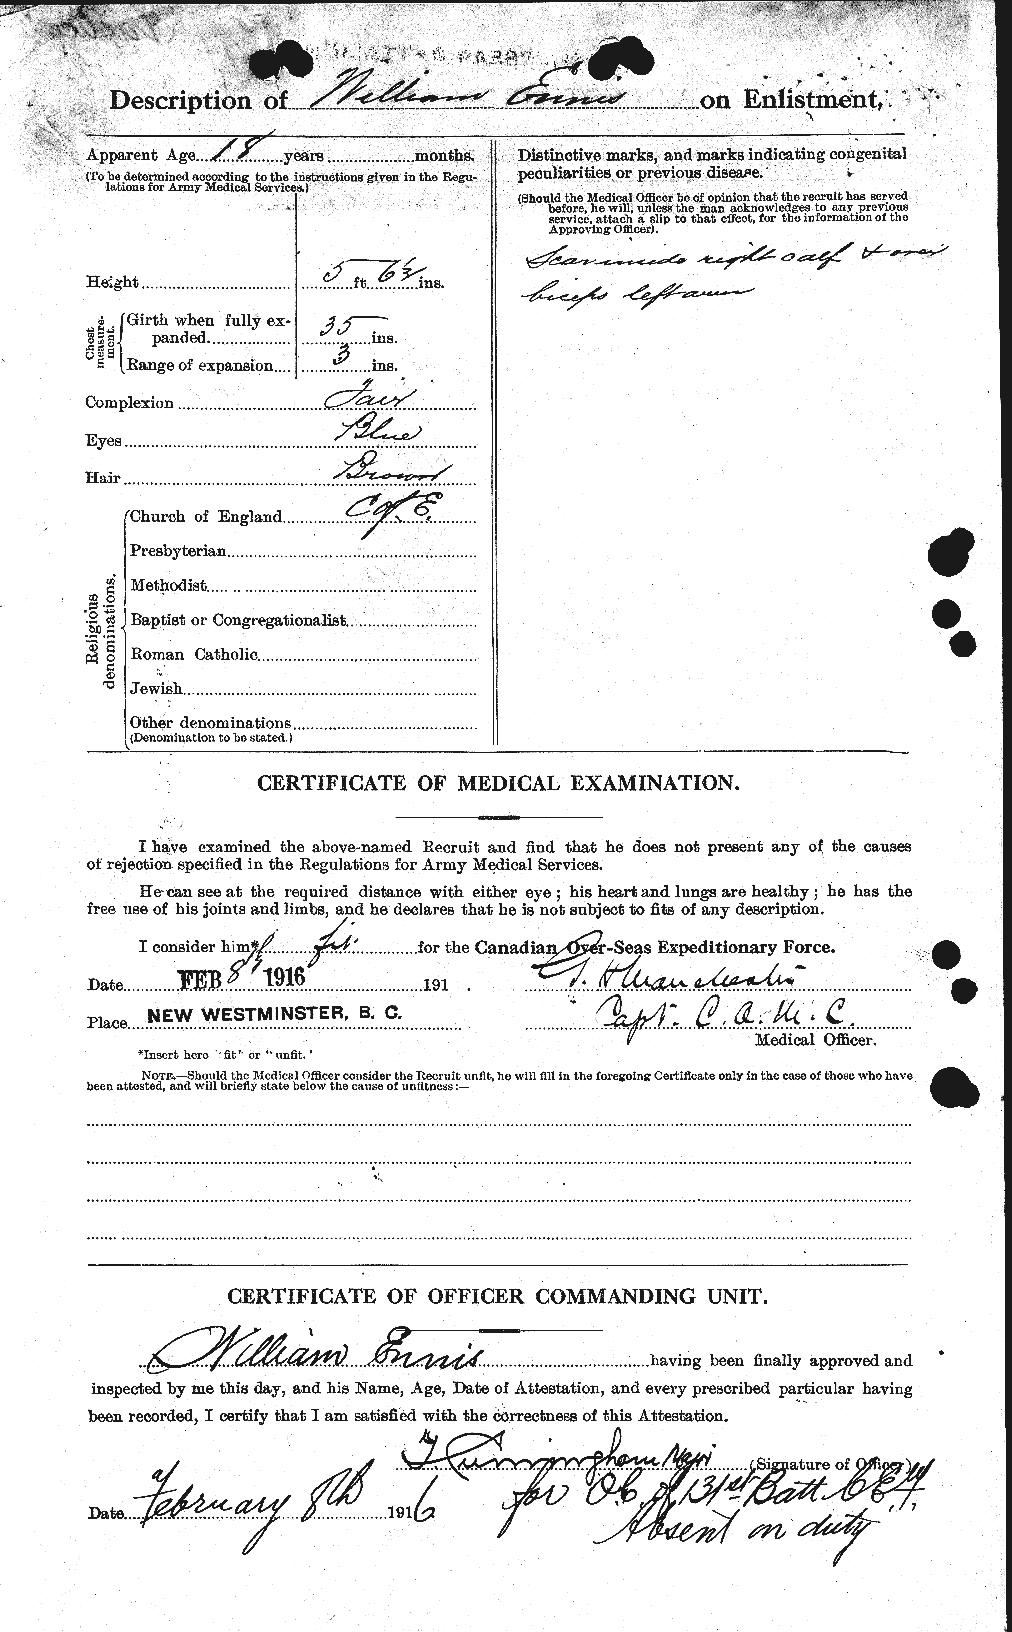 Personnel Records of the First World War - CEF 319222b